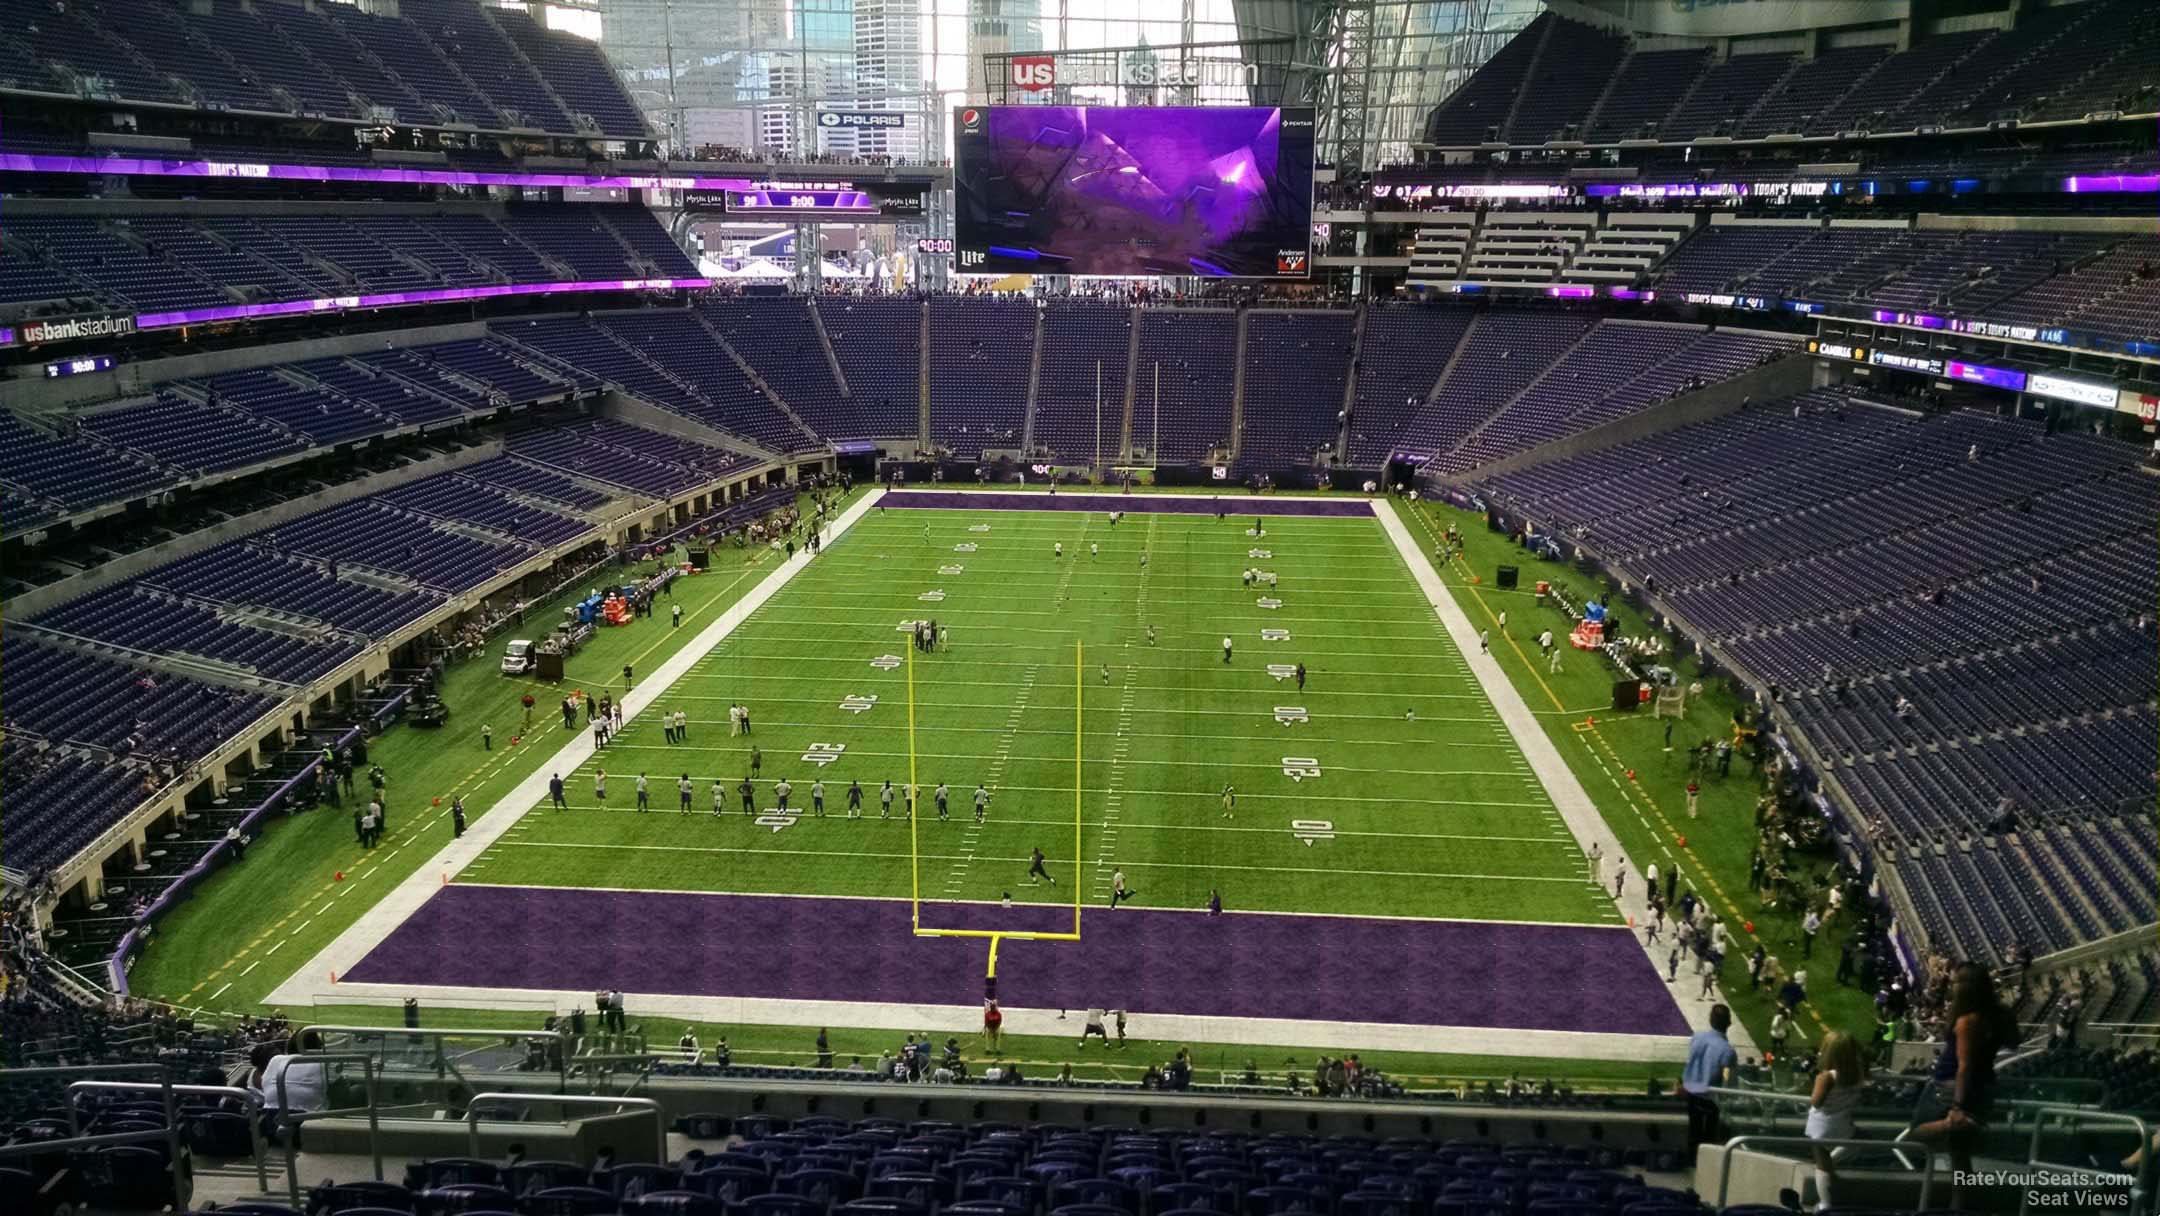 section 223, row 15 seat view  for football - u.s. bank stadium